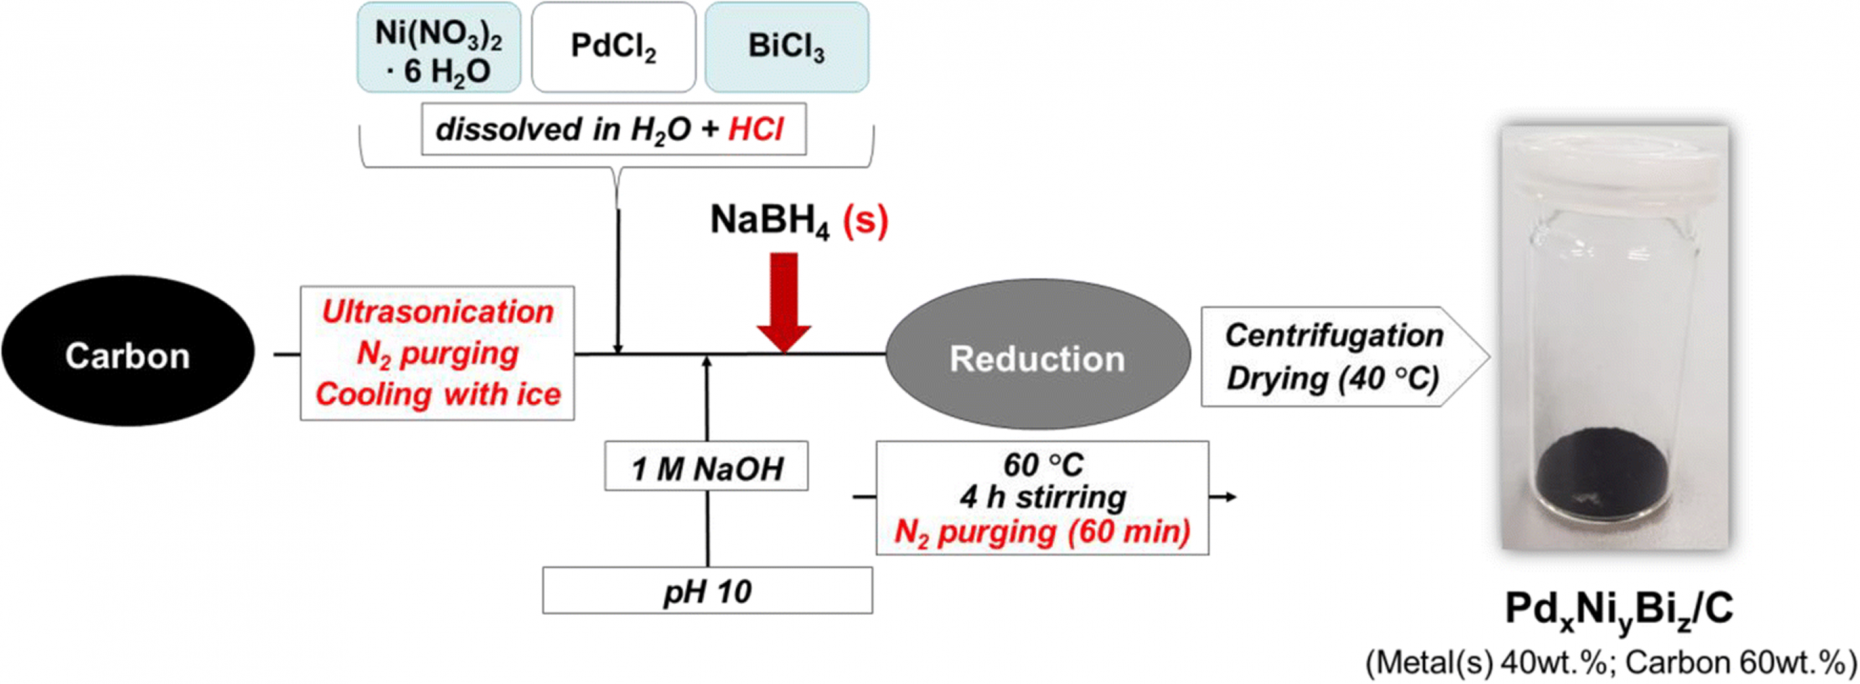 Modified instant reduction method for the synthesis of ternary nanocatalysts for direct ethanol fuel cells (Source: Cermenek et al., Electrocatalysis, Springer, 2020).